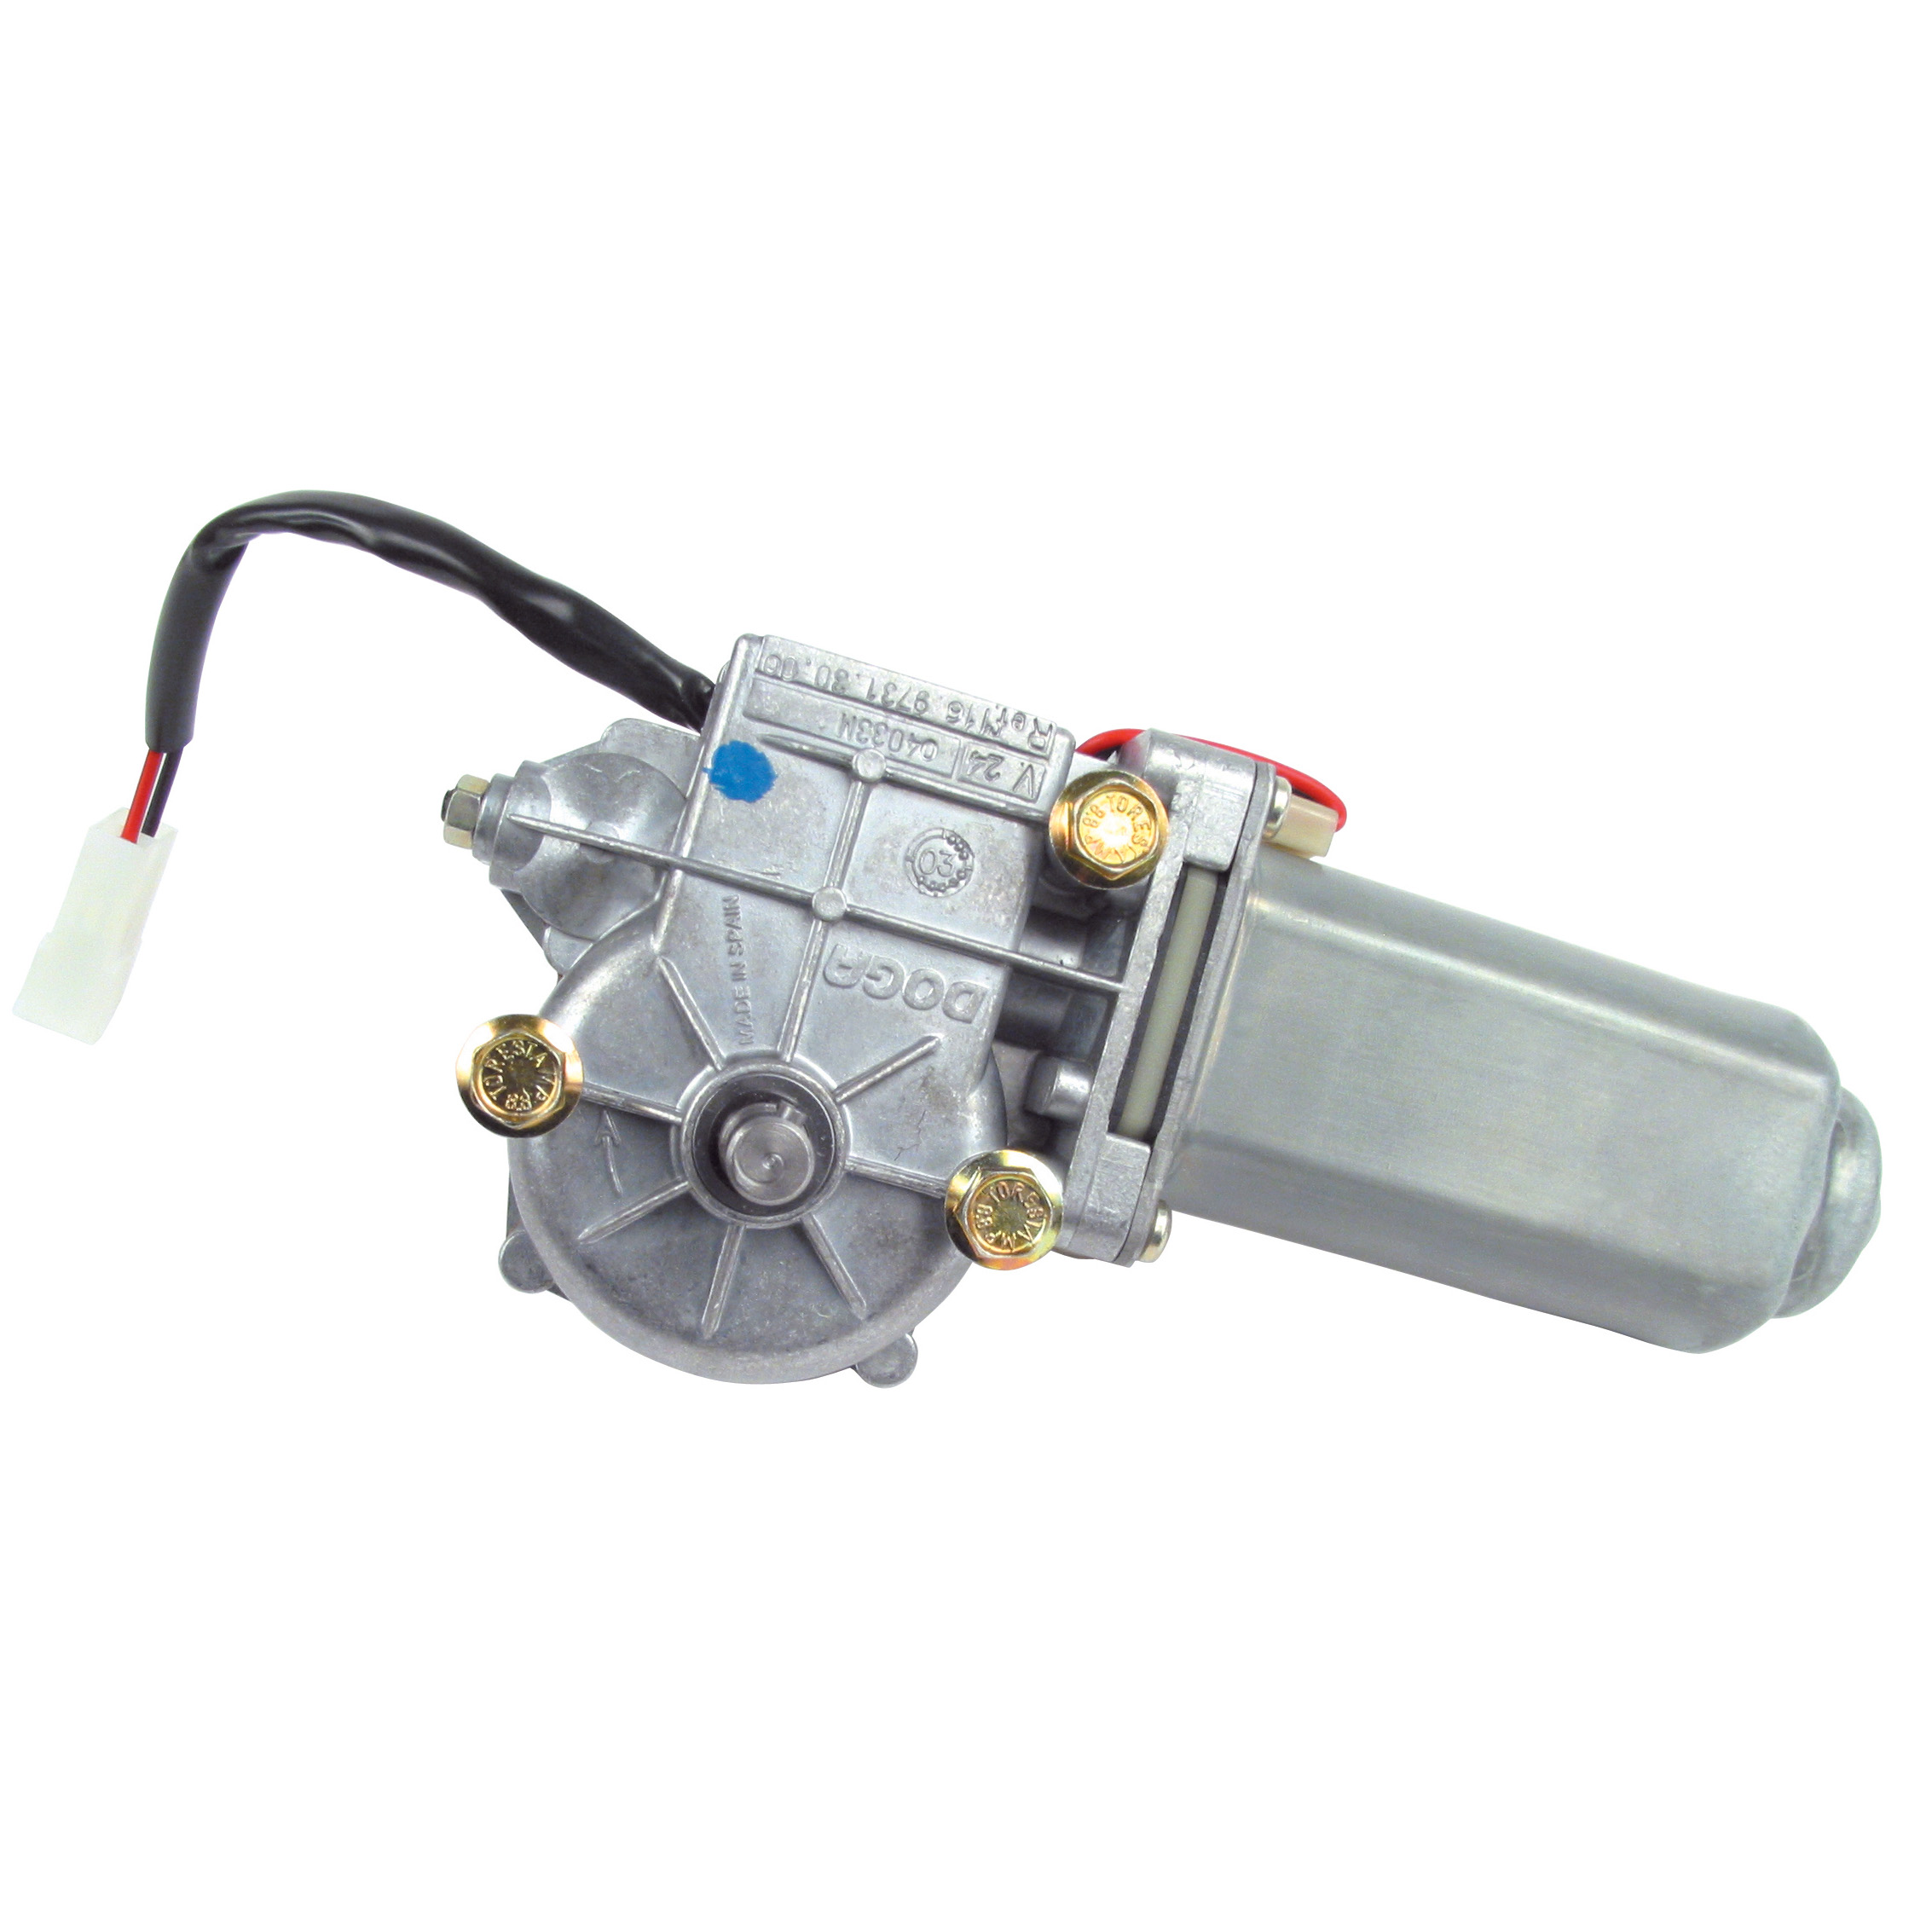 Motor-gearbox 12V and 24V DC - from 1.5 to 2 Nm - from 20 to 38 - 12 V DC